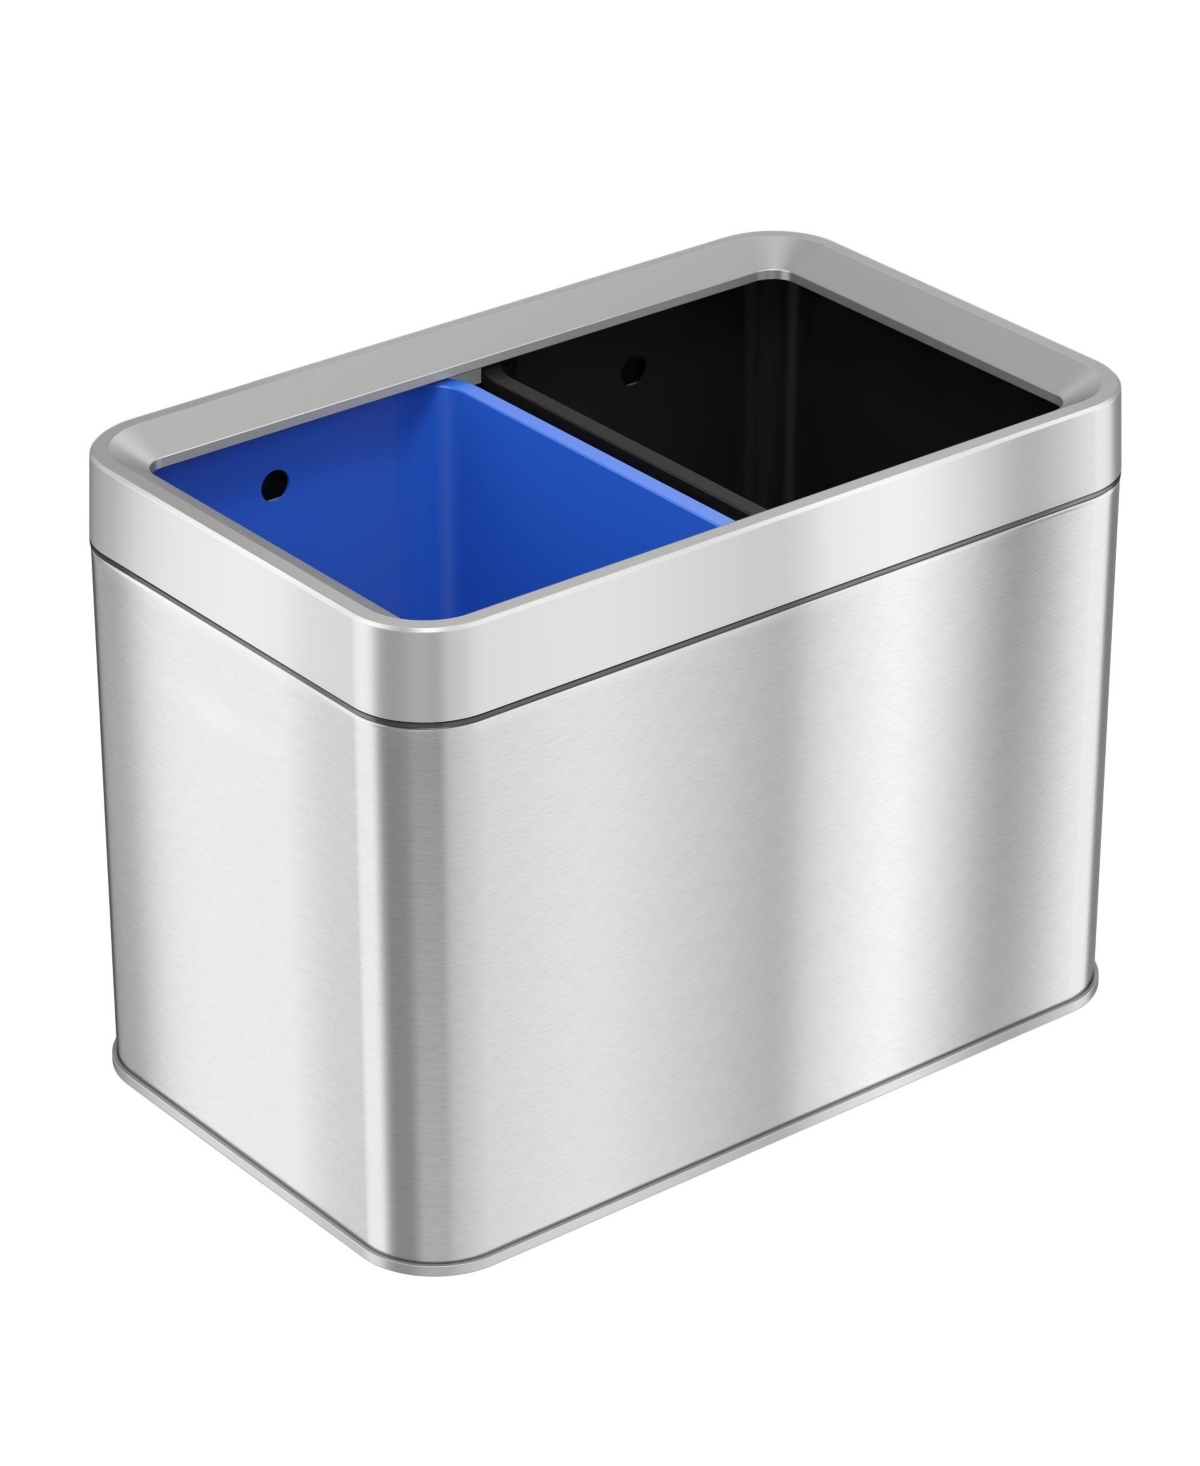 iTouchless Dual-Compartment 5.3 Gallon / 20 liter Open-Top Trash Can - Silver